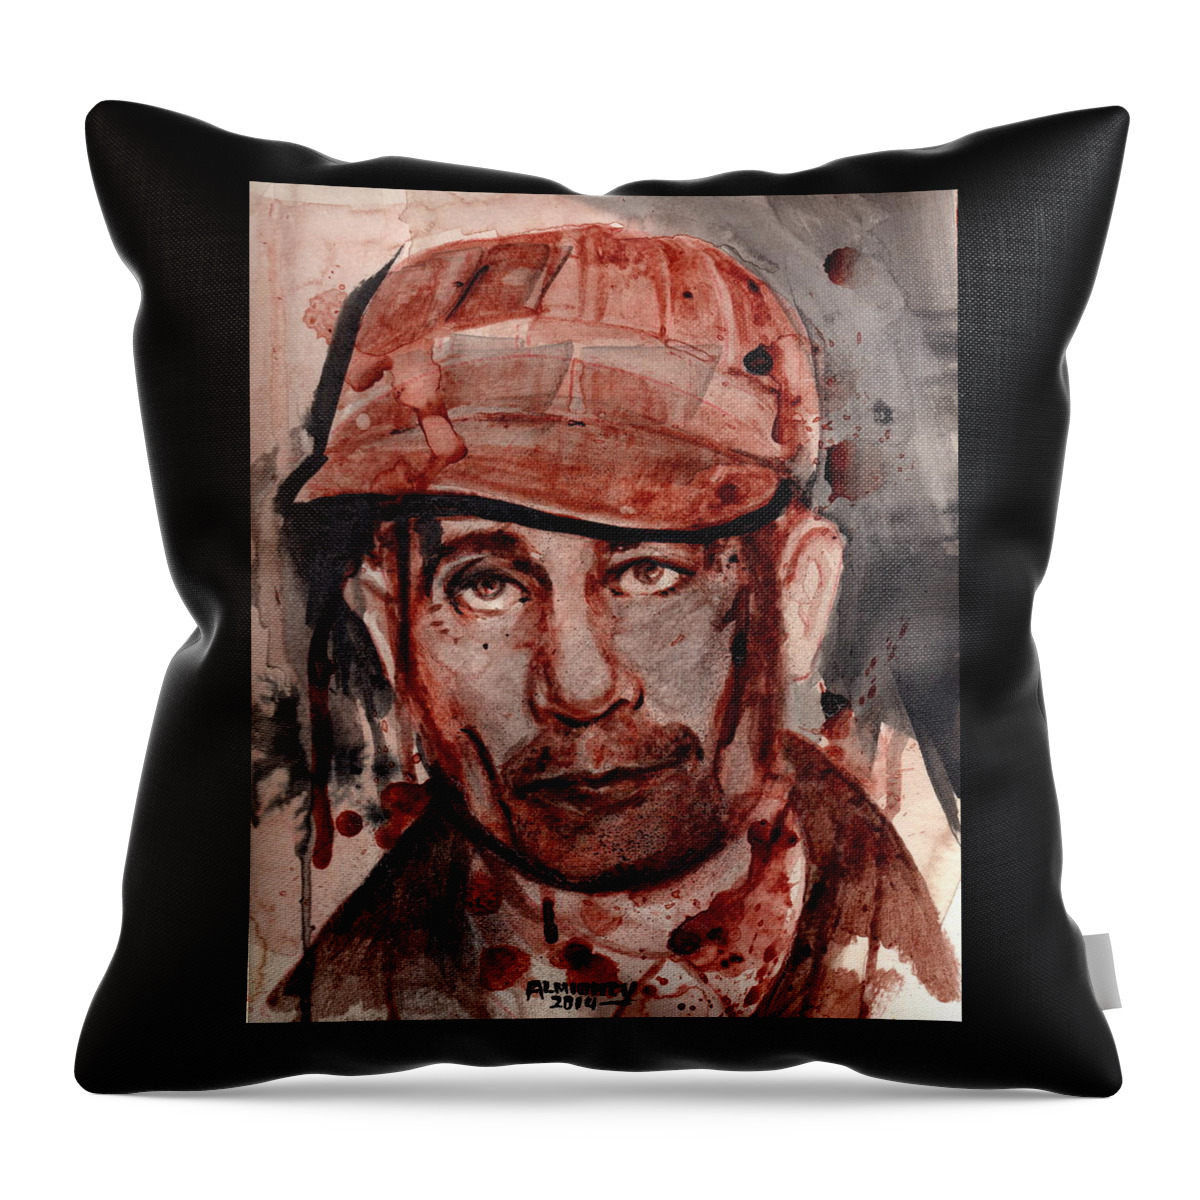 Ed Gein Throw Pillow featuring the painting Ed Gein by Ryan Almighty